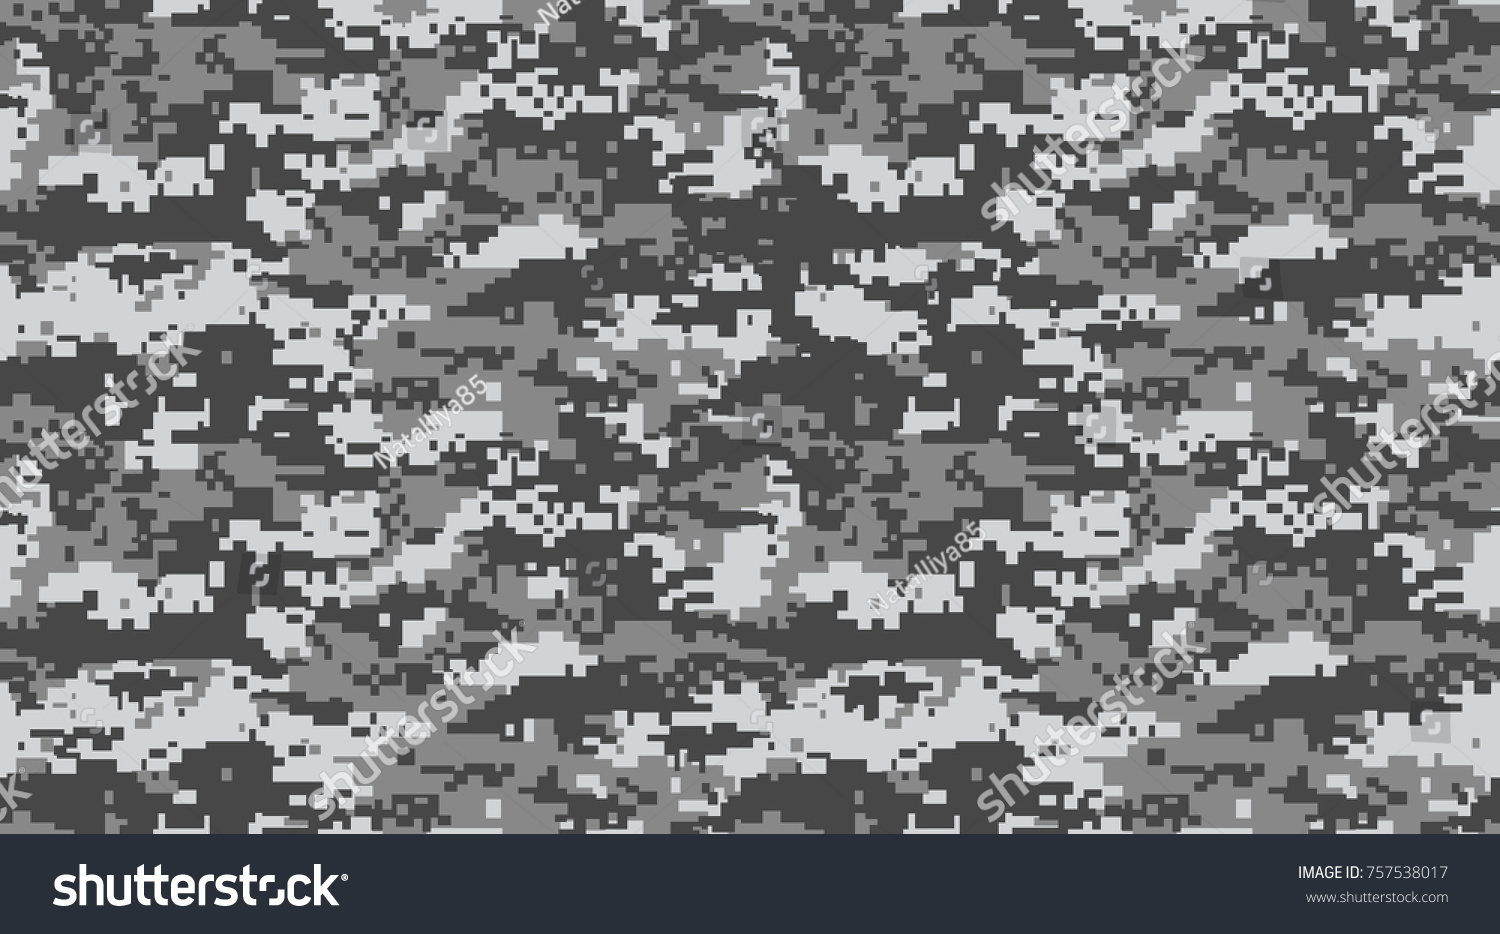 SVG of Seamless pattern. Abstract military or hunting camouflage background. black and white gray. Vector illustration. repeated seamless svg